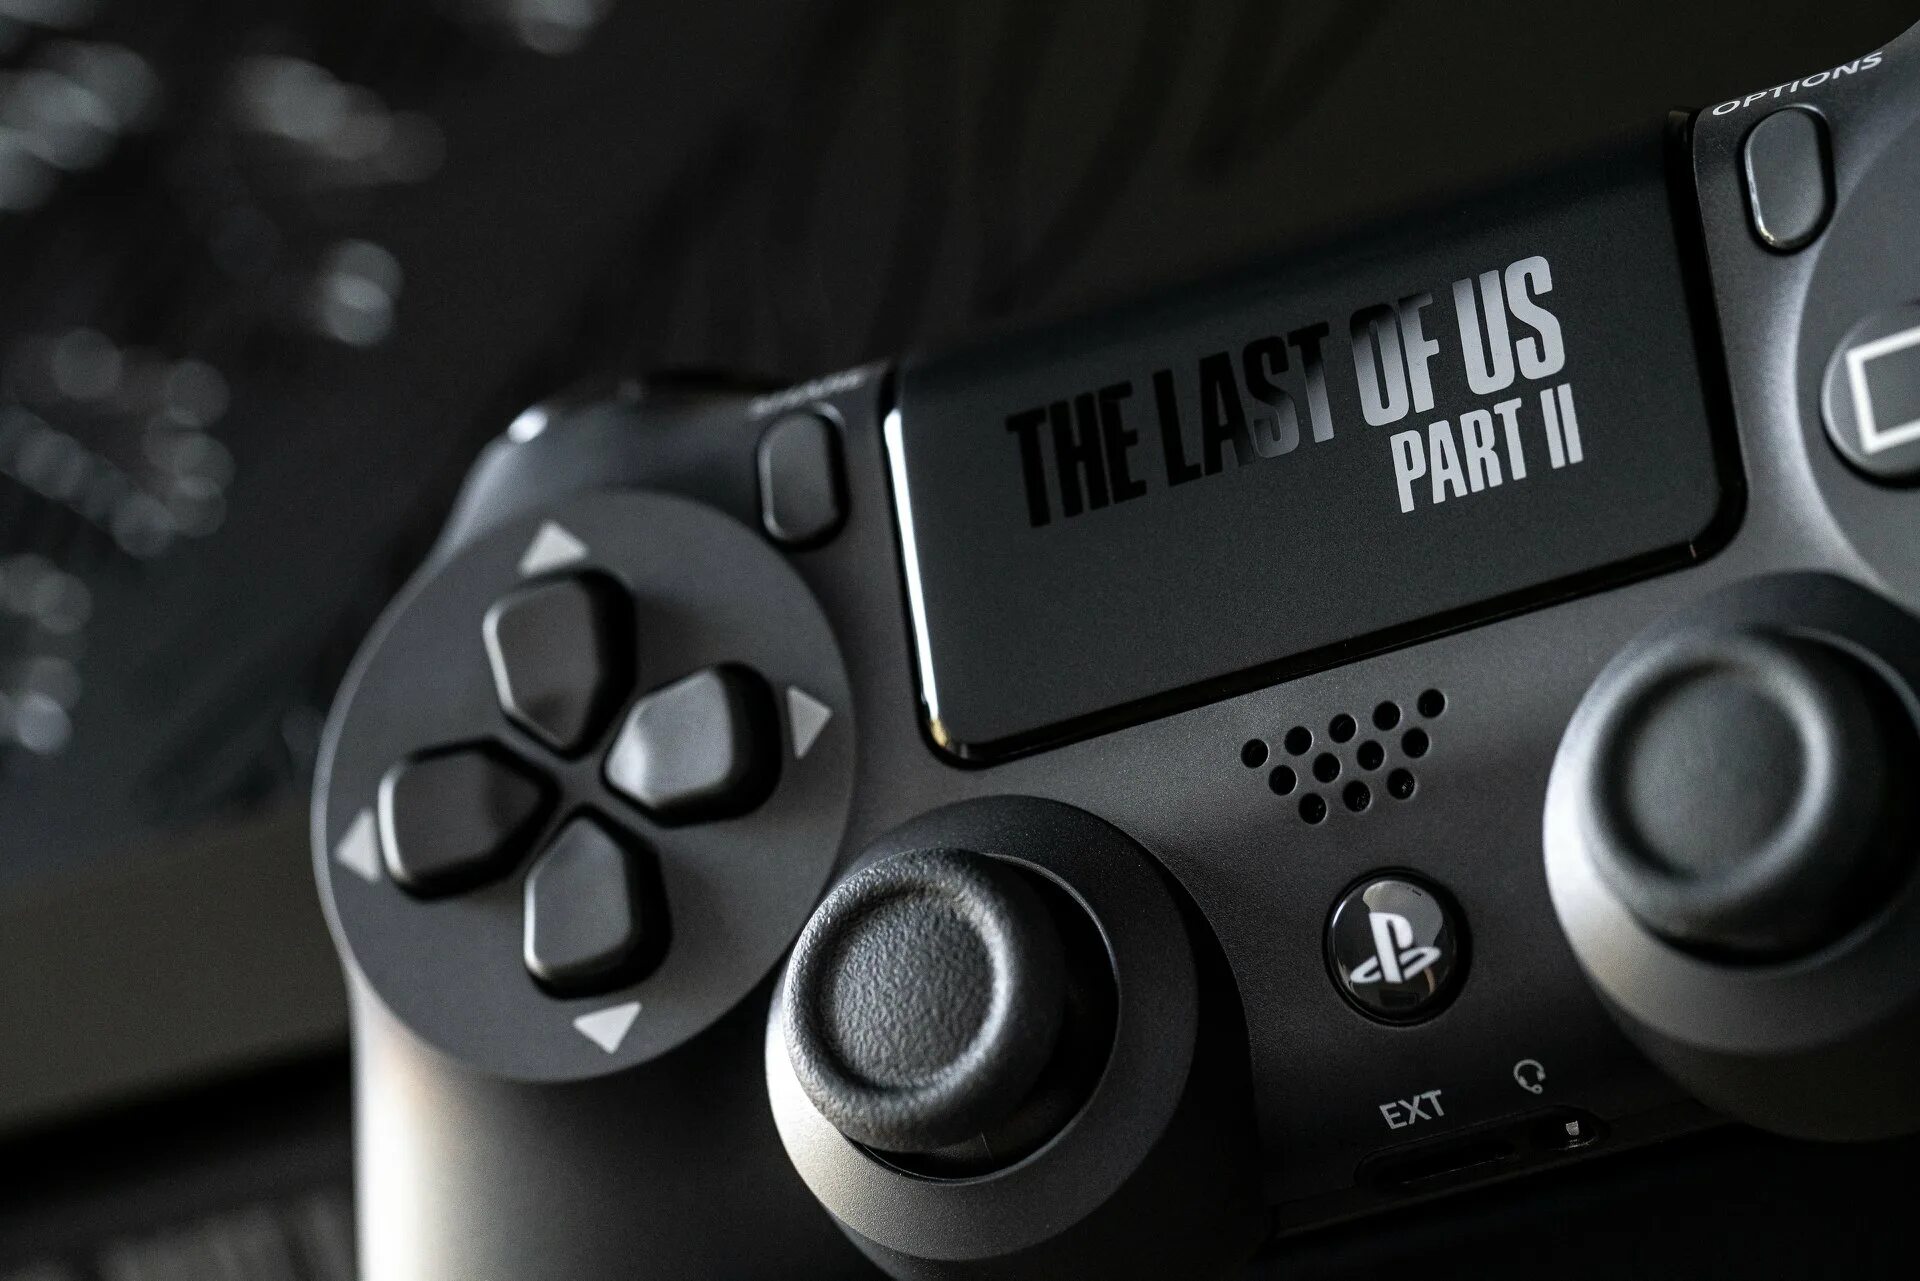 Ps2 ps4. Ps4 the last of us 2 Limited Edition. Джойстик ps4 Limited Edition the last of us. PLAYSTATION 4 the last of us 2 Edition. Ps2 Limited Edition.